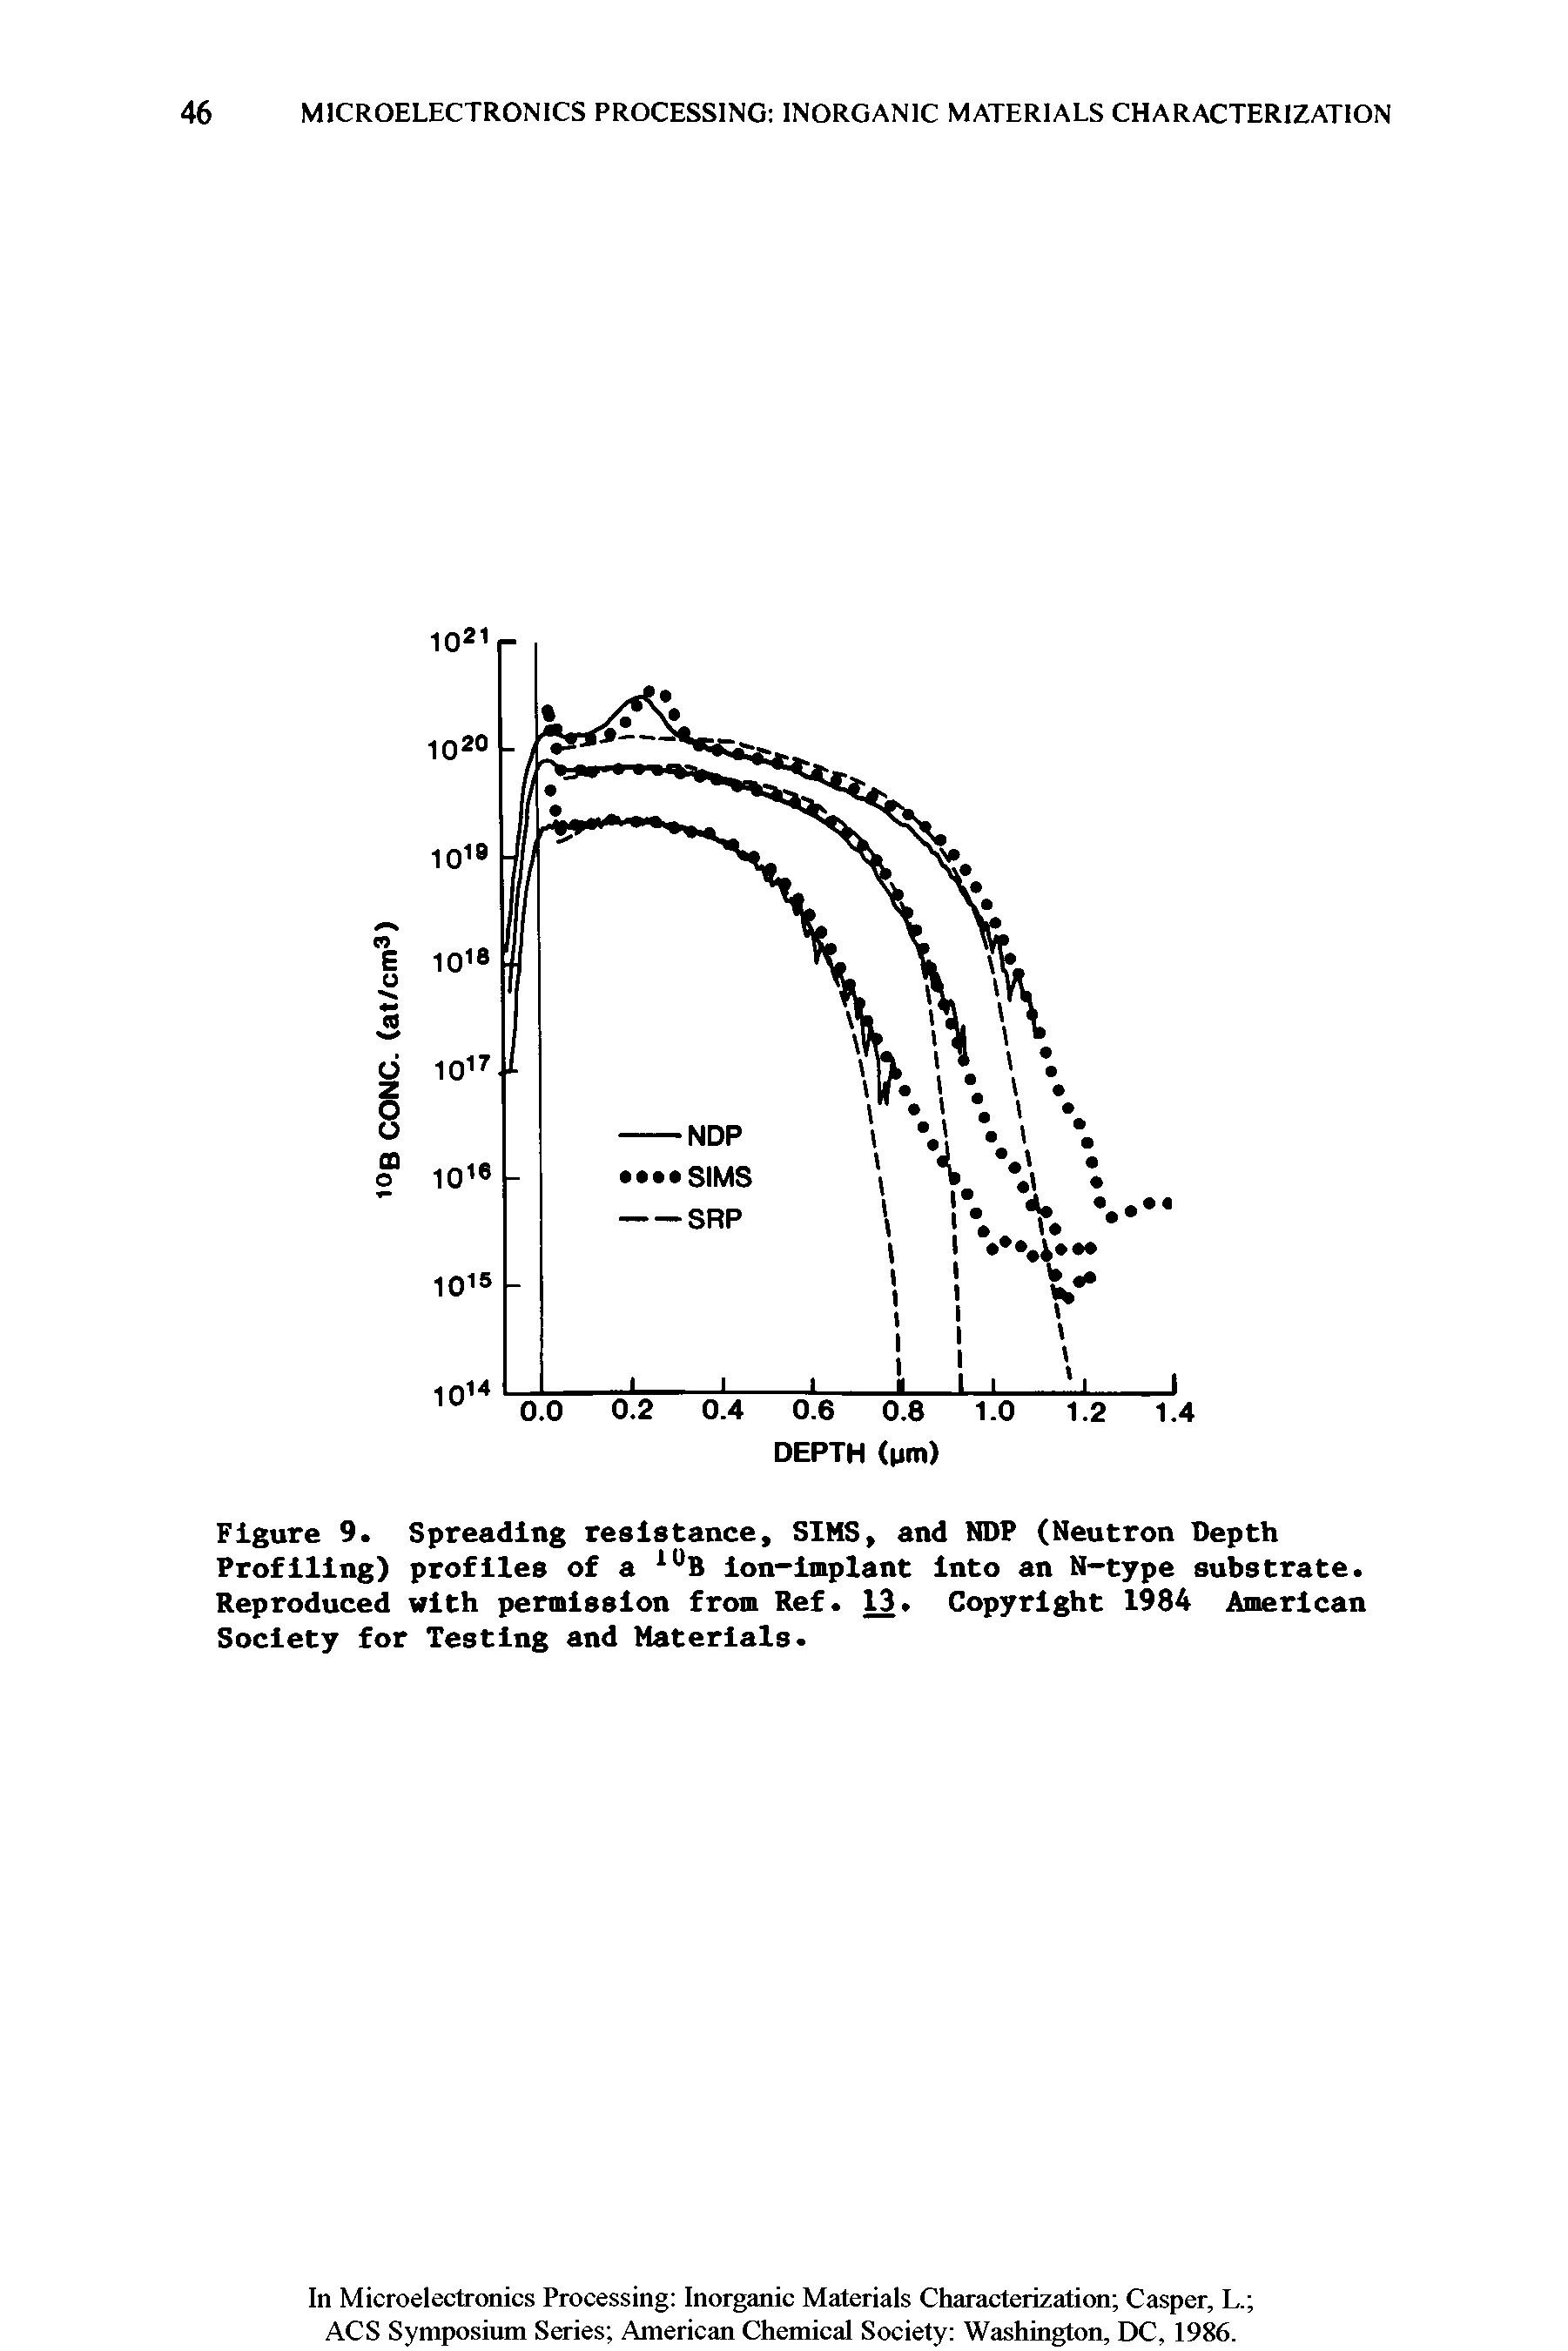 Figure 9. Spreading resistance, SIMS, and NDP (Neutron Depth Profiling) profiles of a 8 lon-lmplant Into an N-type substrate. Reproduced with permission from Ref. Copyright 1984 American...